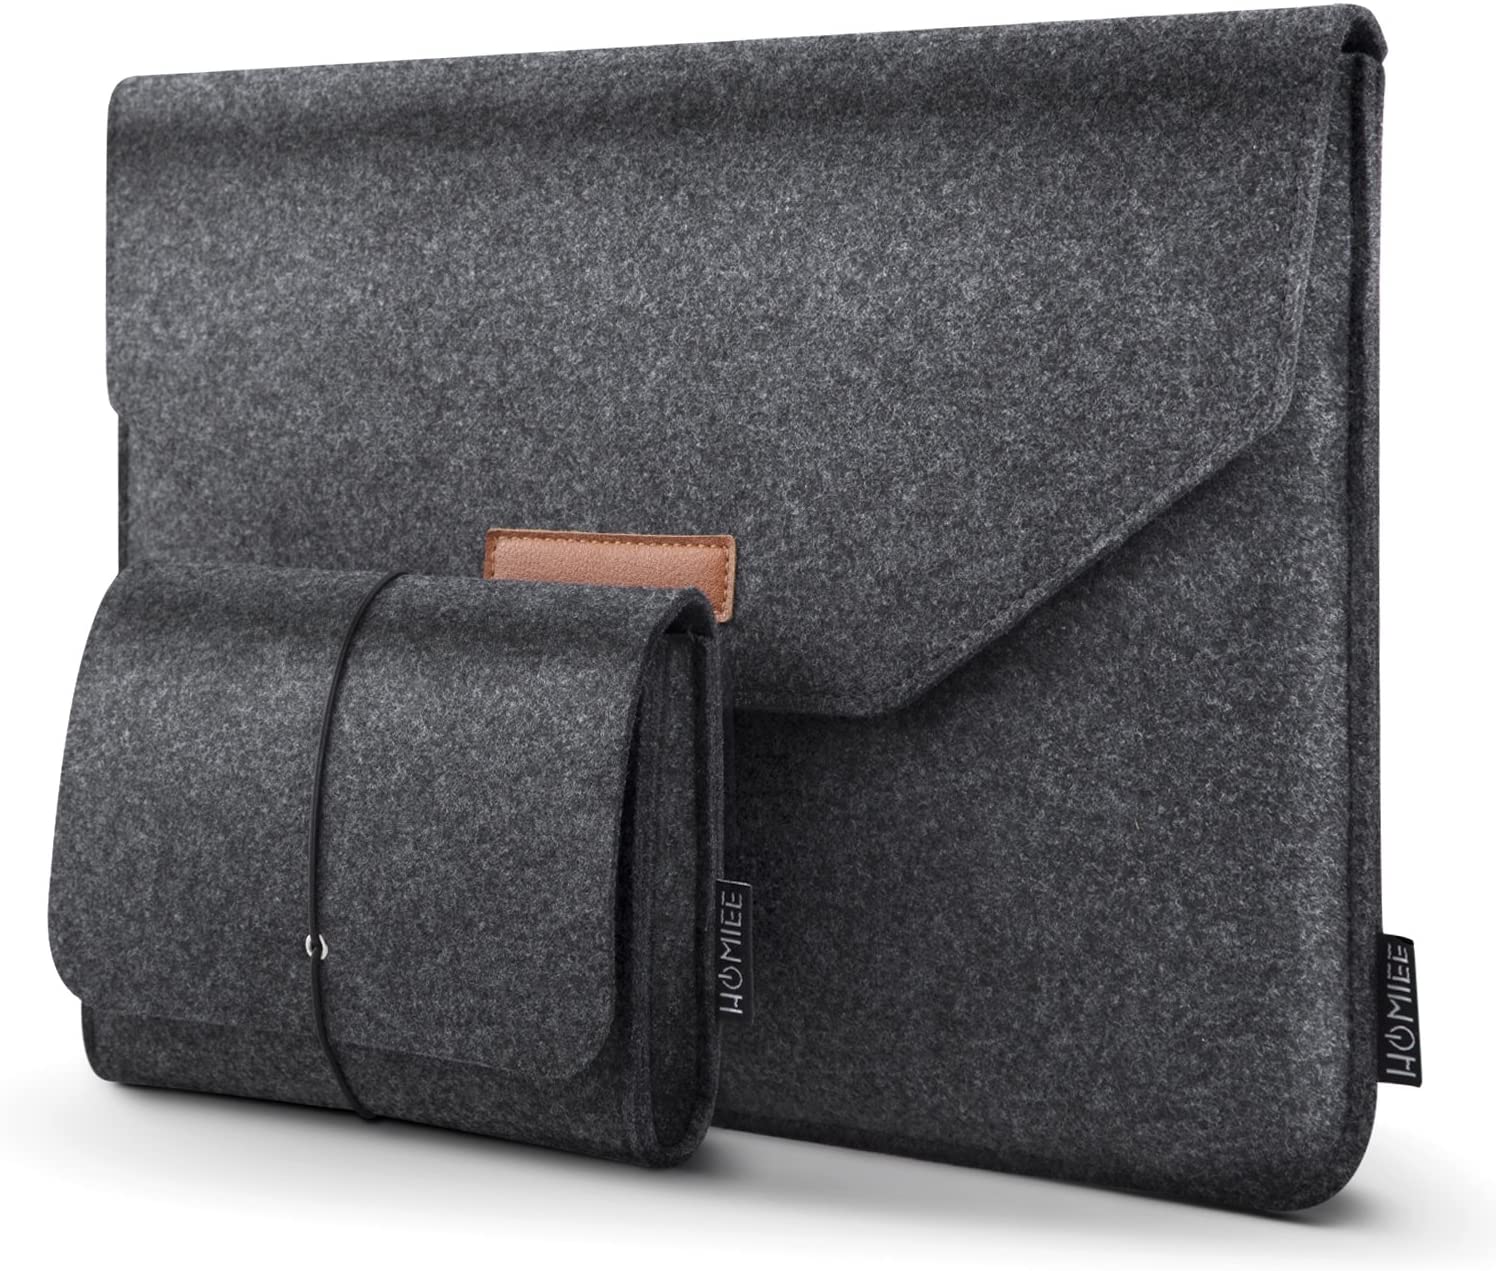 HOMIEE Laptop Sleeve with Extra Storage Case and Mouse Pad, Felt Laptop Sleeve Bag, for 15.6 Inch Laptops (15.4-15.6 inch, Velcro Sticky, Dark Gray) - e4cents